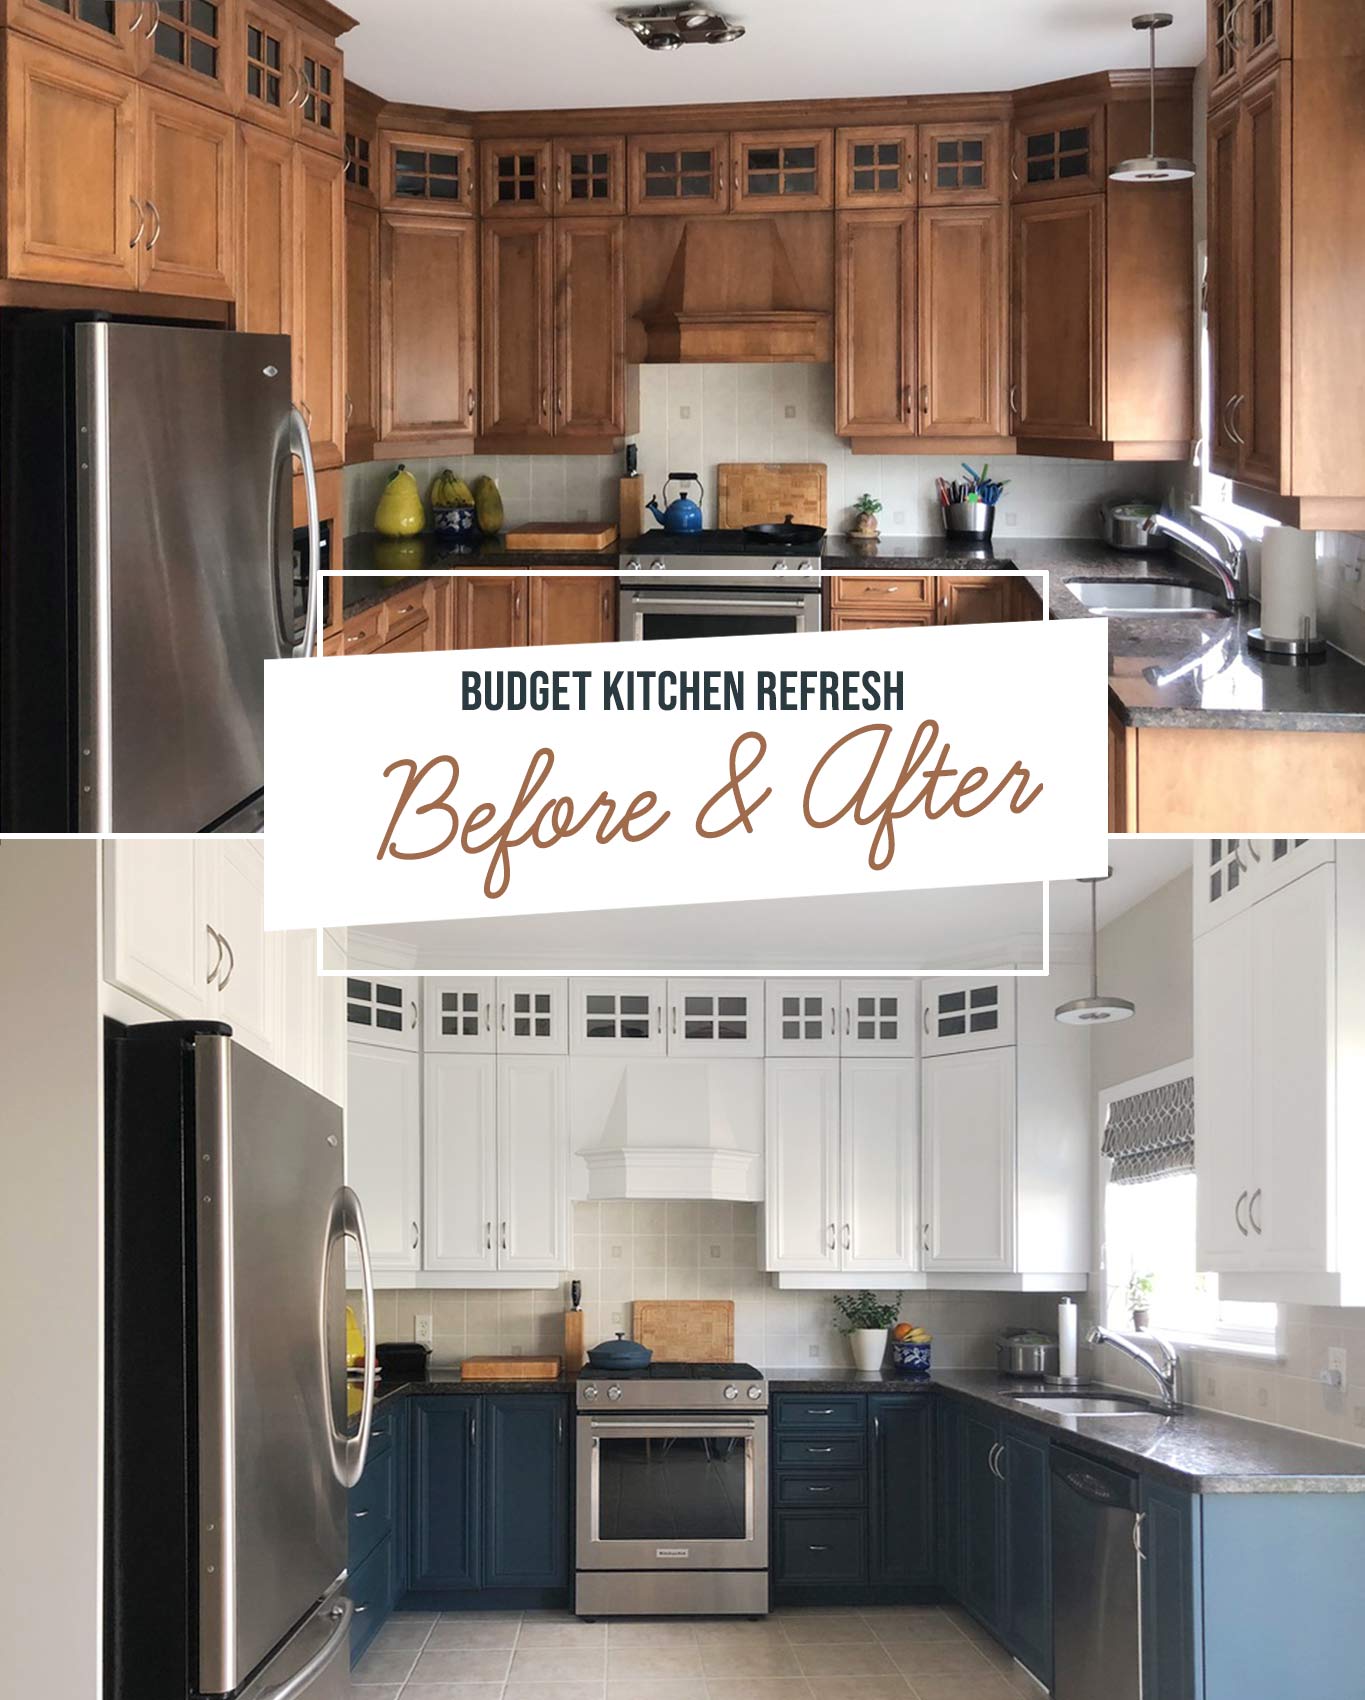 Budget Kitchen Refresh by Fresh is Real